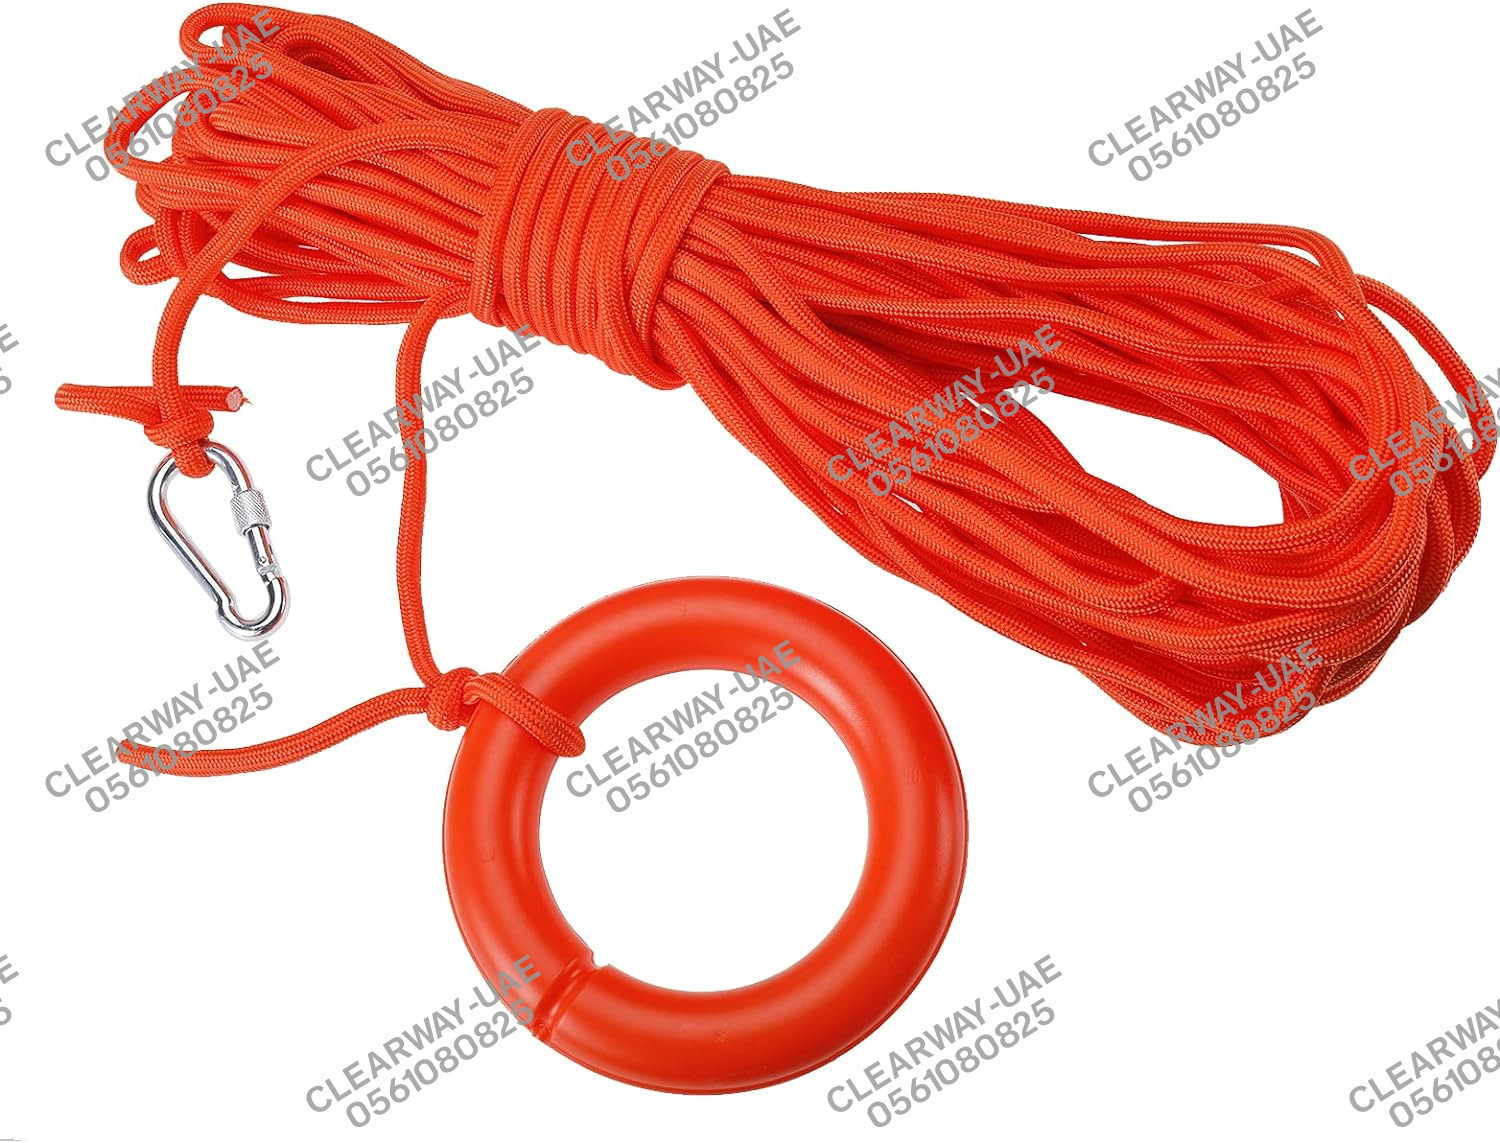 FLOATING LIFE SAVING ROPE SUPPLIER IN ABUDHABI UAE CLEARWAY RYXO SAFETY20